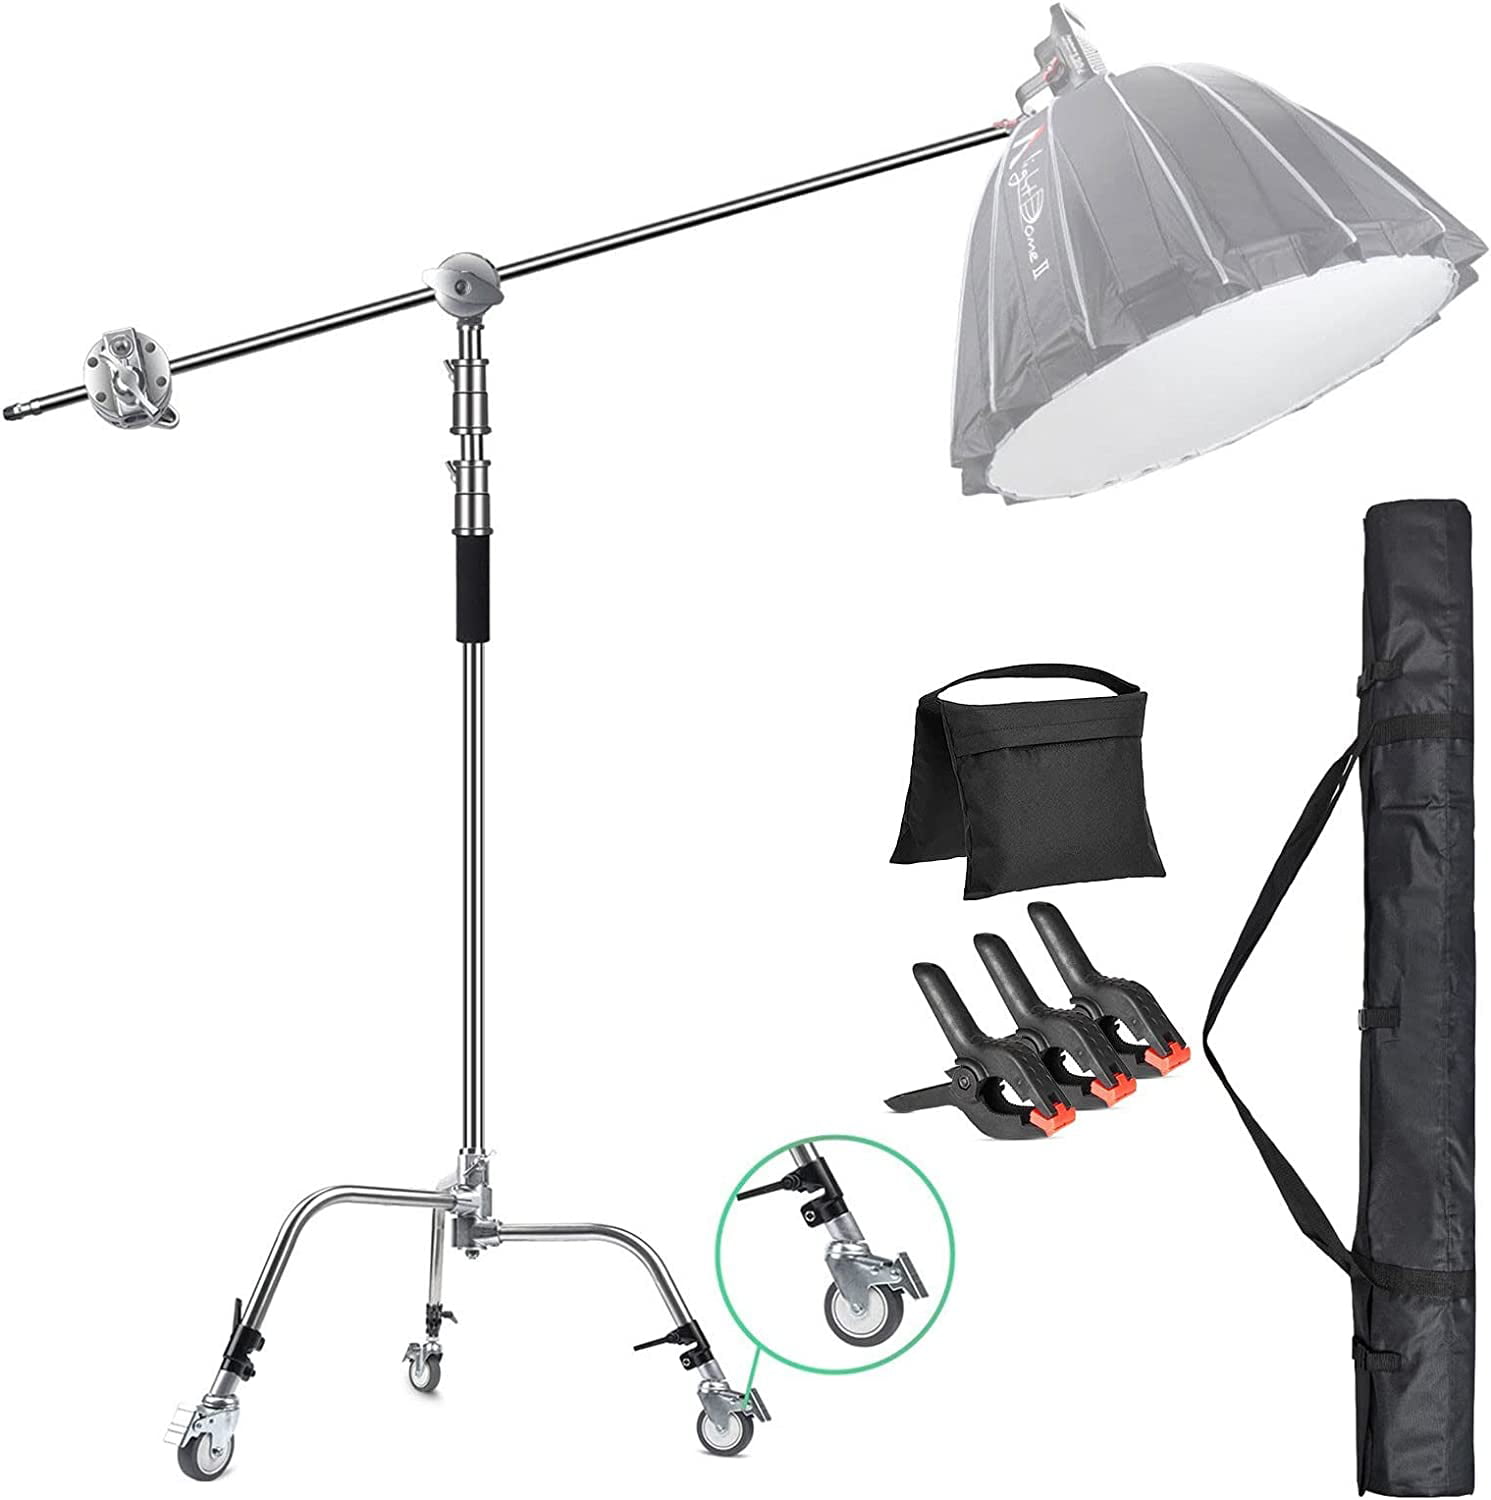 EACHSHOT C Stand Metal w/Bag Wheel Sandbag Clip Max 10.8ft/330cm with 3.28ft/106cm Holding Arm 2 Pieces Grip Head for Godox AD400 Pro AD600 Pro AD600BM Aputure 120D 300D II for Photography Studio 